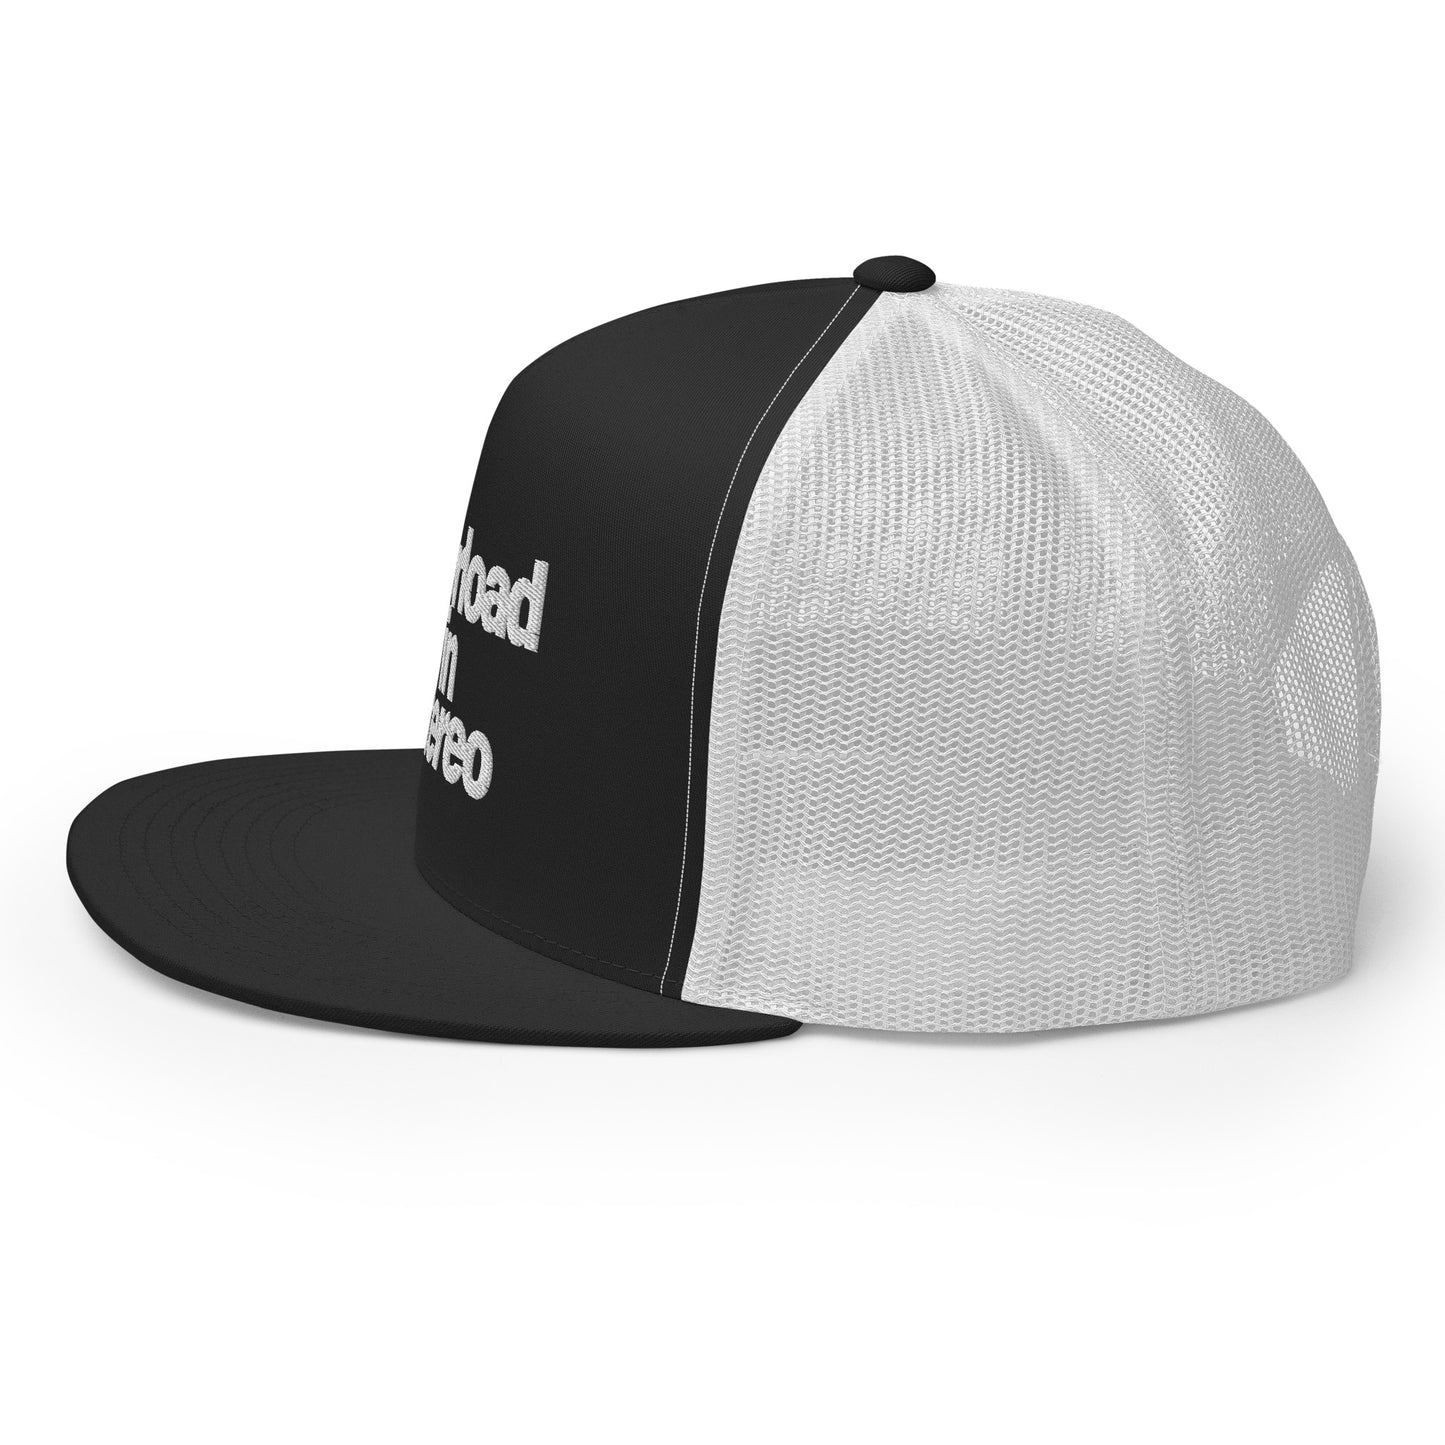 Overload in Stereo snapback hat